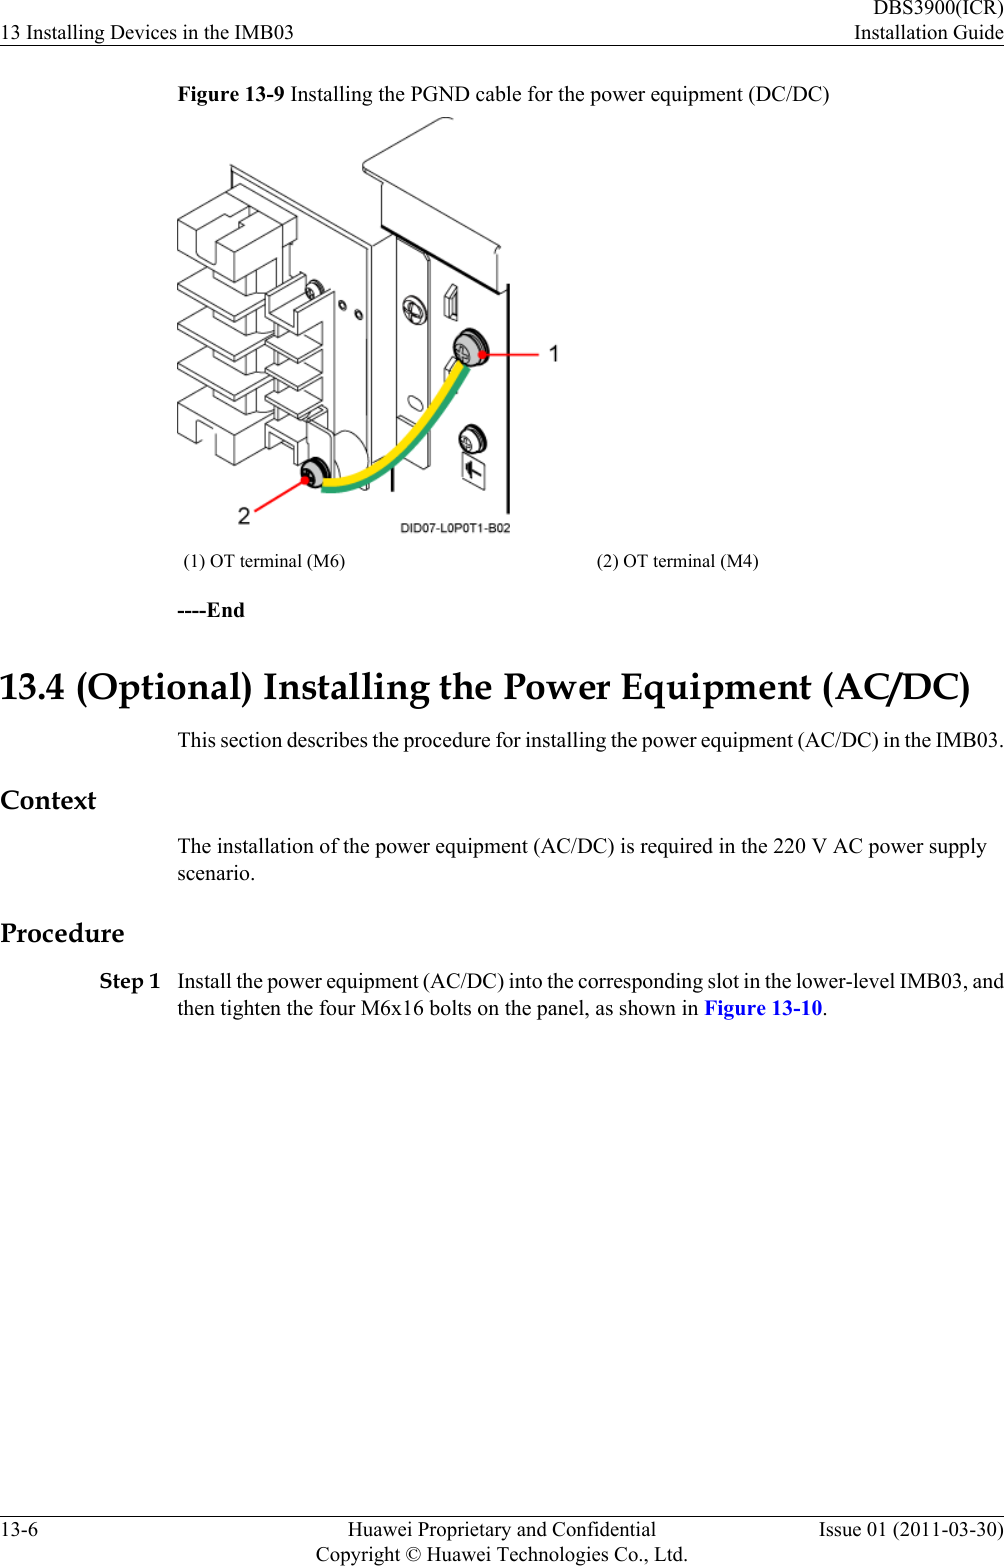 Figure 13-9 Installing the PGND cable for the power equipment (DC/DC)(1) OT terminal (M6) (2) OT terminal (M4)----End13.4 (Optional) Installing the Power Equipment (AC/DC)This section describes the procedure for installing the power equipment (AC/DC) in the IMB03.ContextThe installation of the power equipment (AC/DC) is required in the 220 V AC power supplyscenario.ProcedureStep 1 Install the power equipment (AC/DC) into the corresponding slot in the lower-level IMB03, andthen tighten the four M6x16 bolts on the panel, as shown in Figure 13-10.13 Installing Devices in the IMB03DBS3900(ICR)Installation Guide13-6 Huawei Proprietary and ConfidentialCopyright © Huawei Technologies Co., Ltd.Issue 01 (2011-03-30)